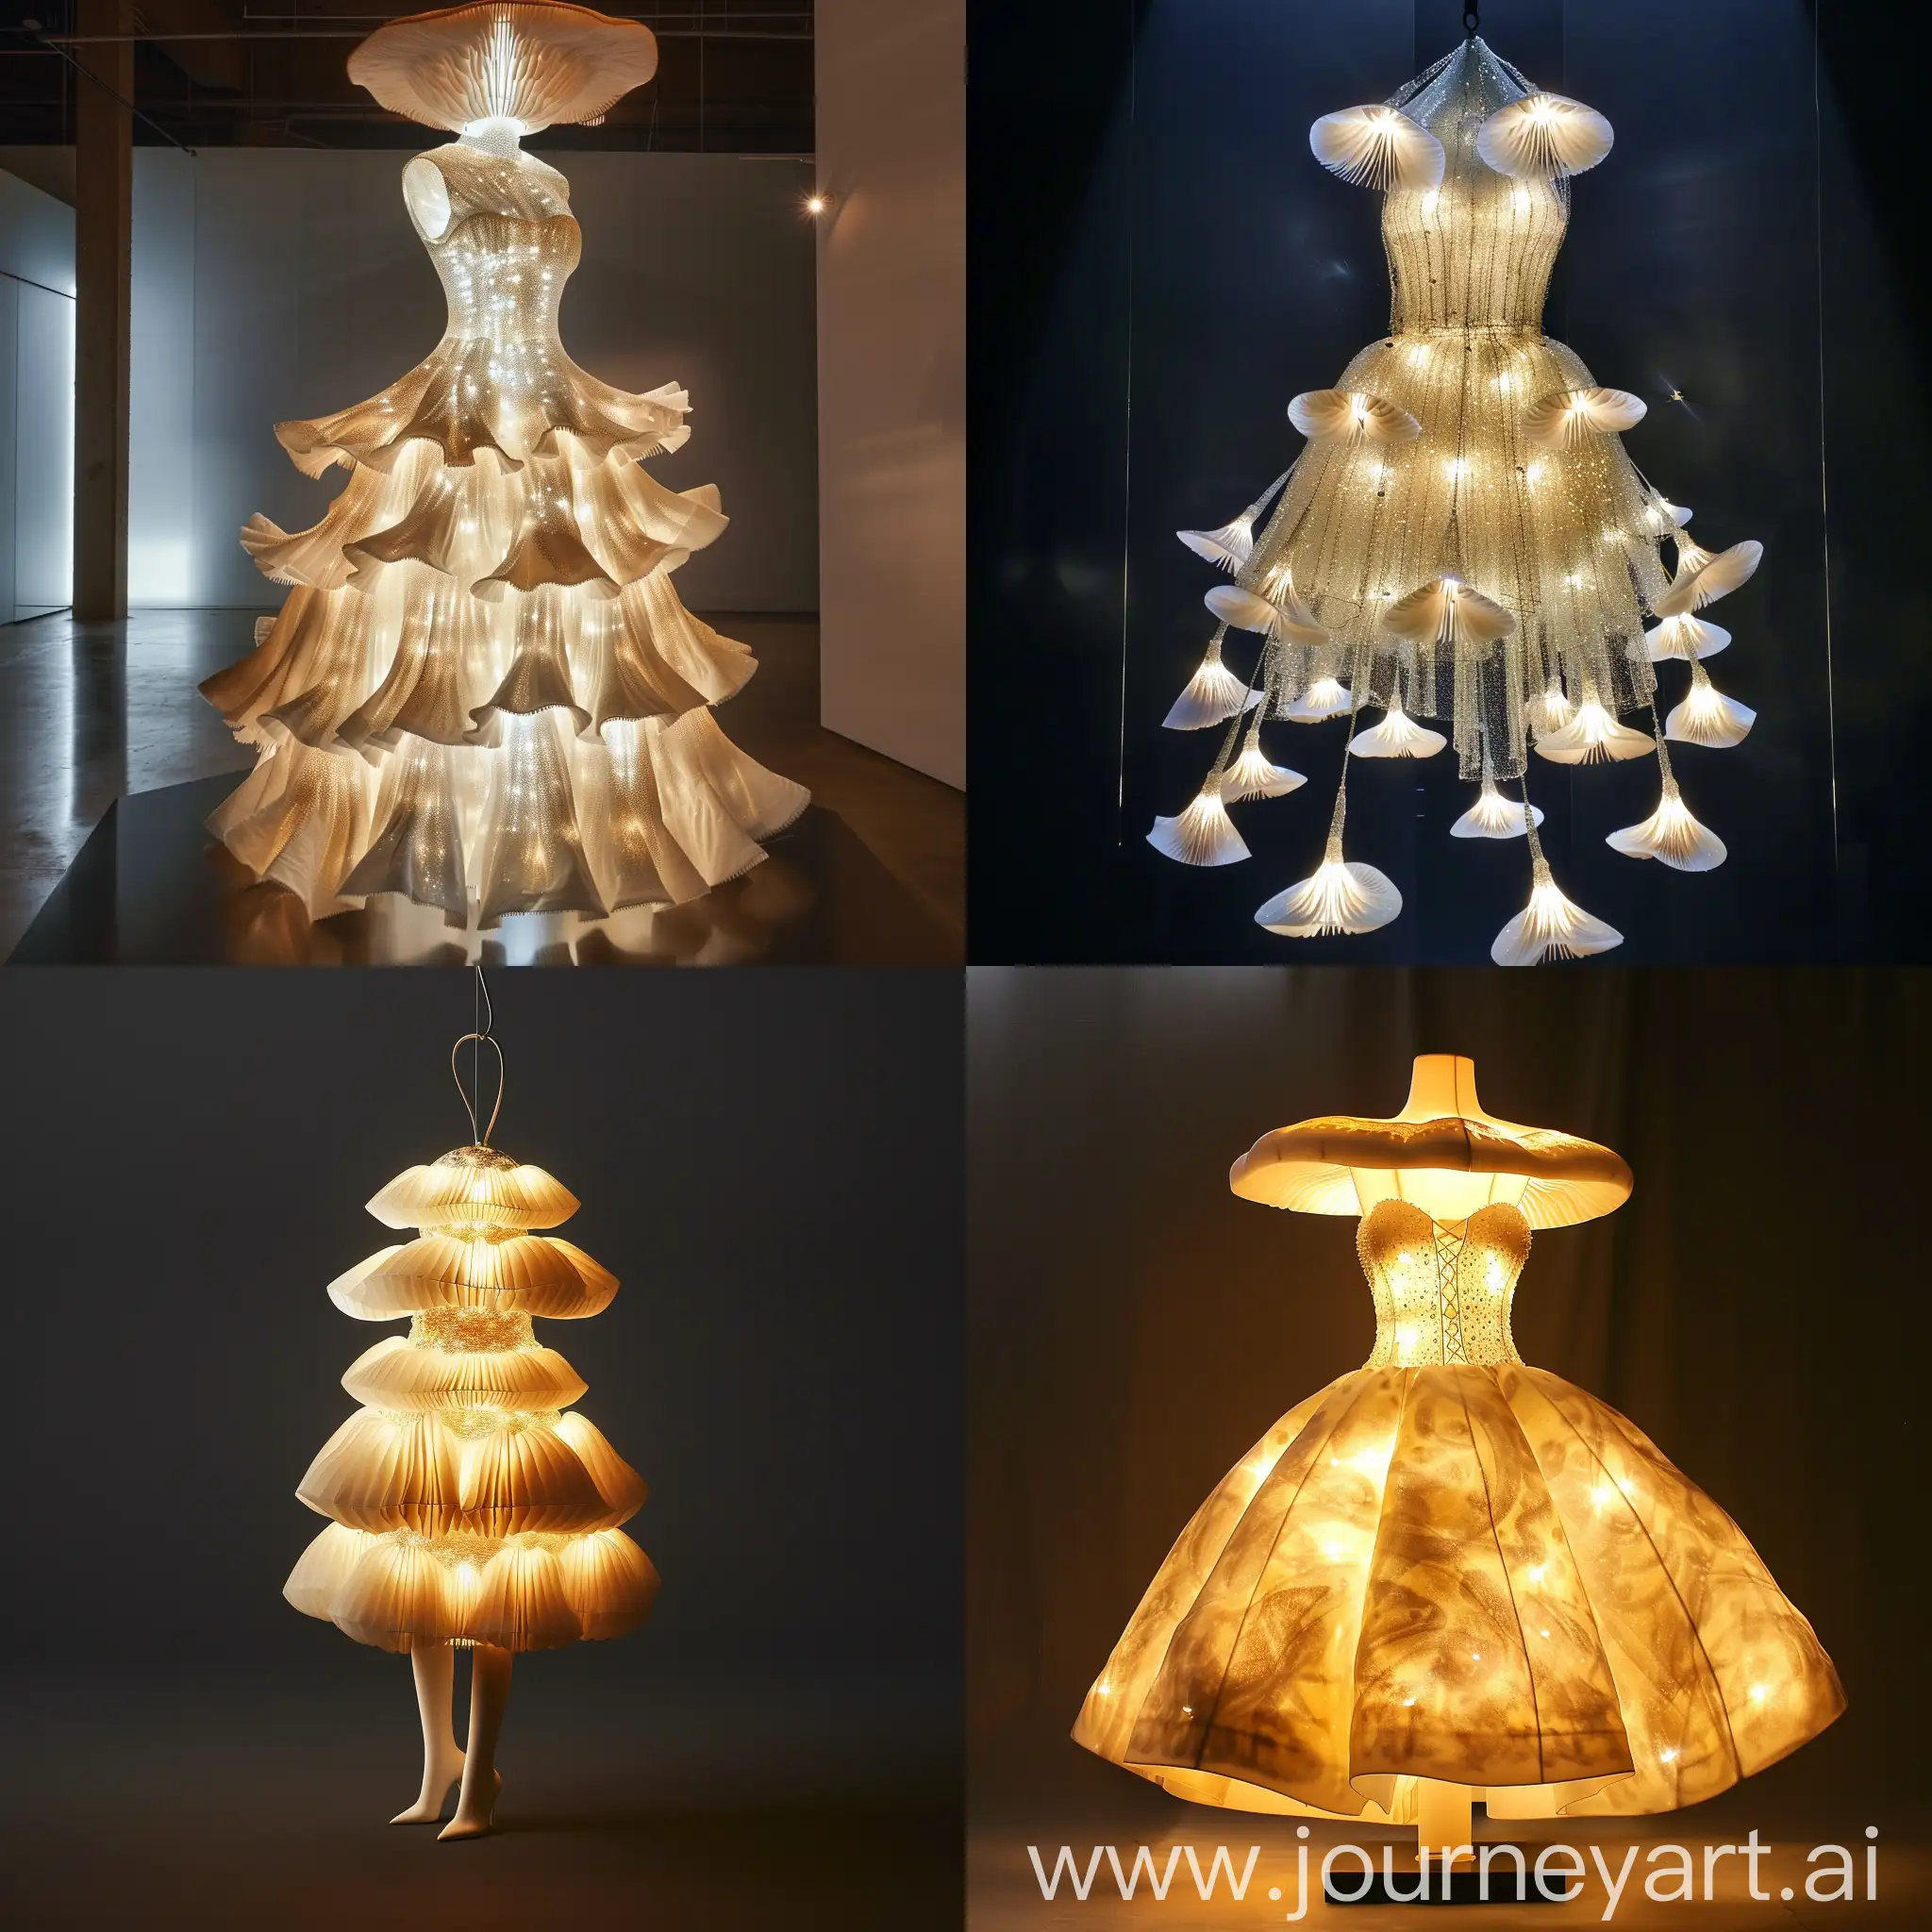 dress made of a mushroom light inspiared by sou fujimoto style celling art 